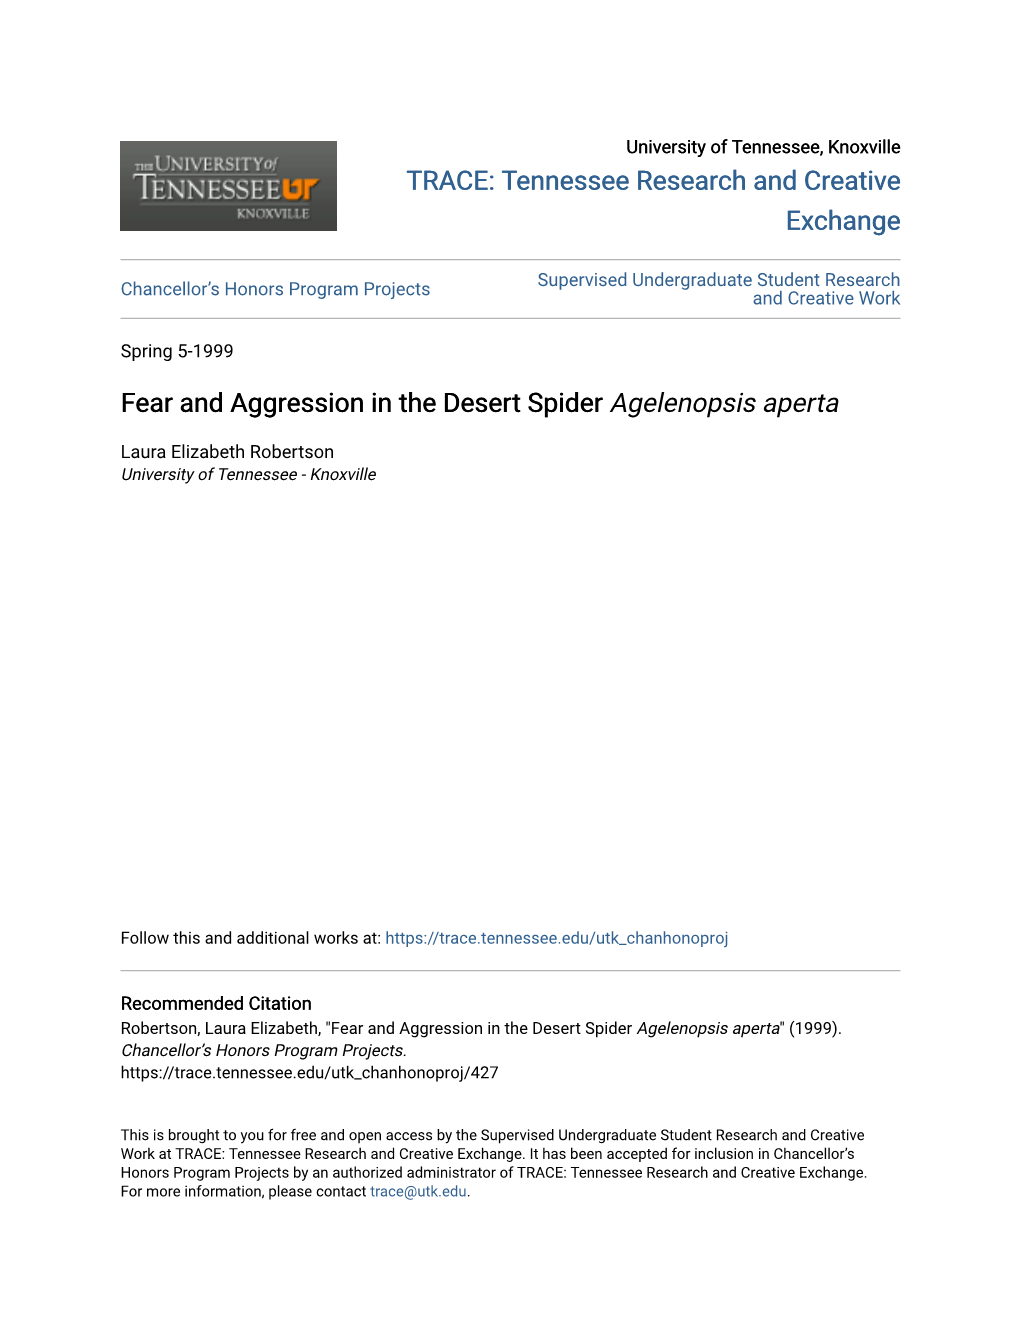 Fear and Aggression in the Desert Spider Agelenopsis Aperta